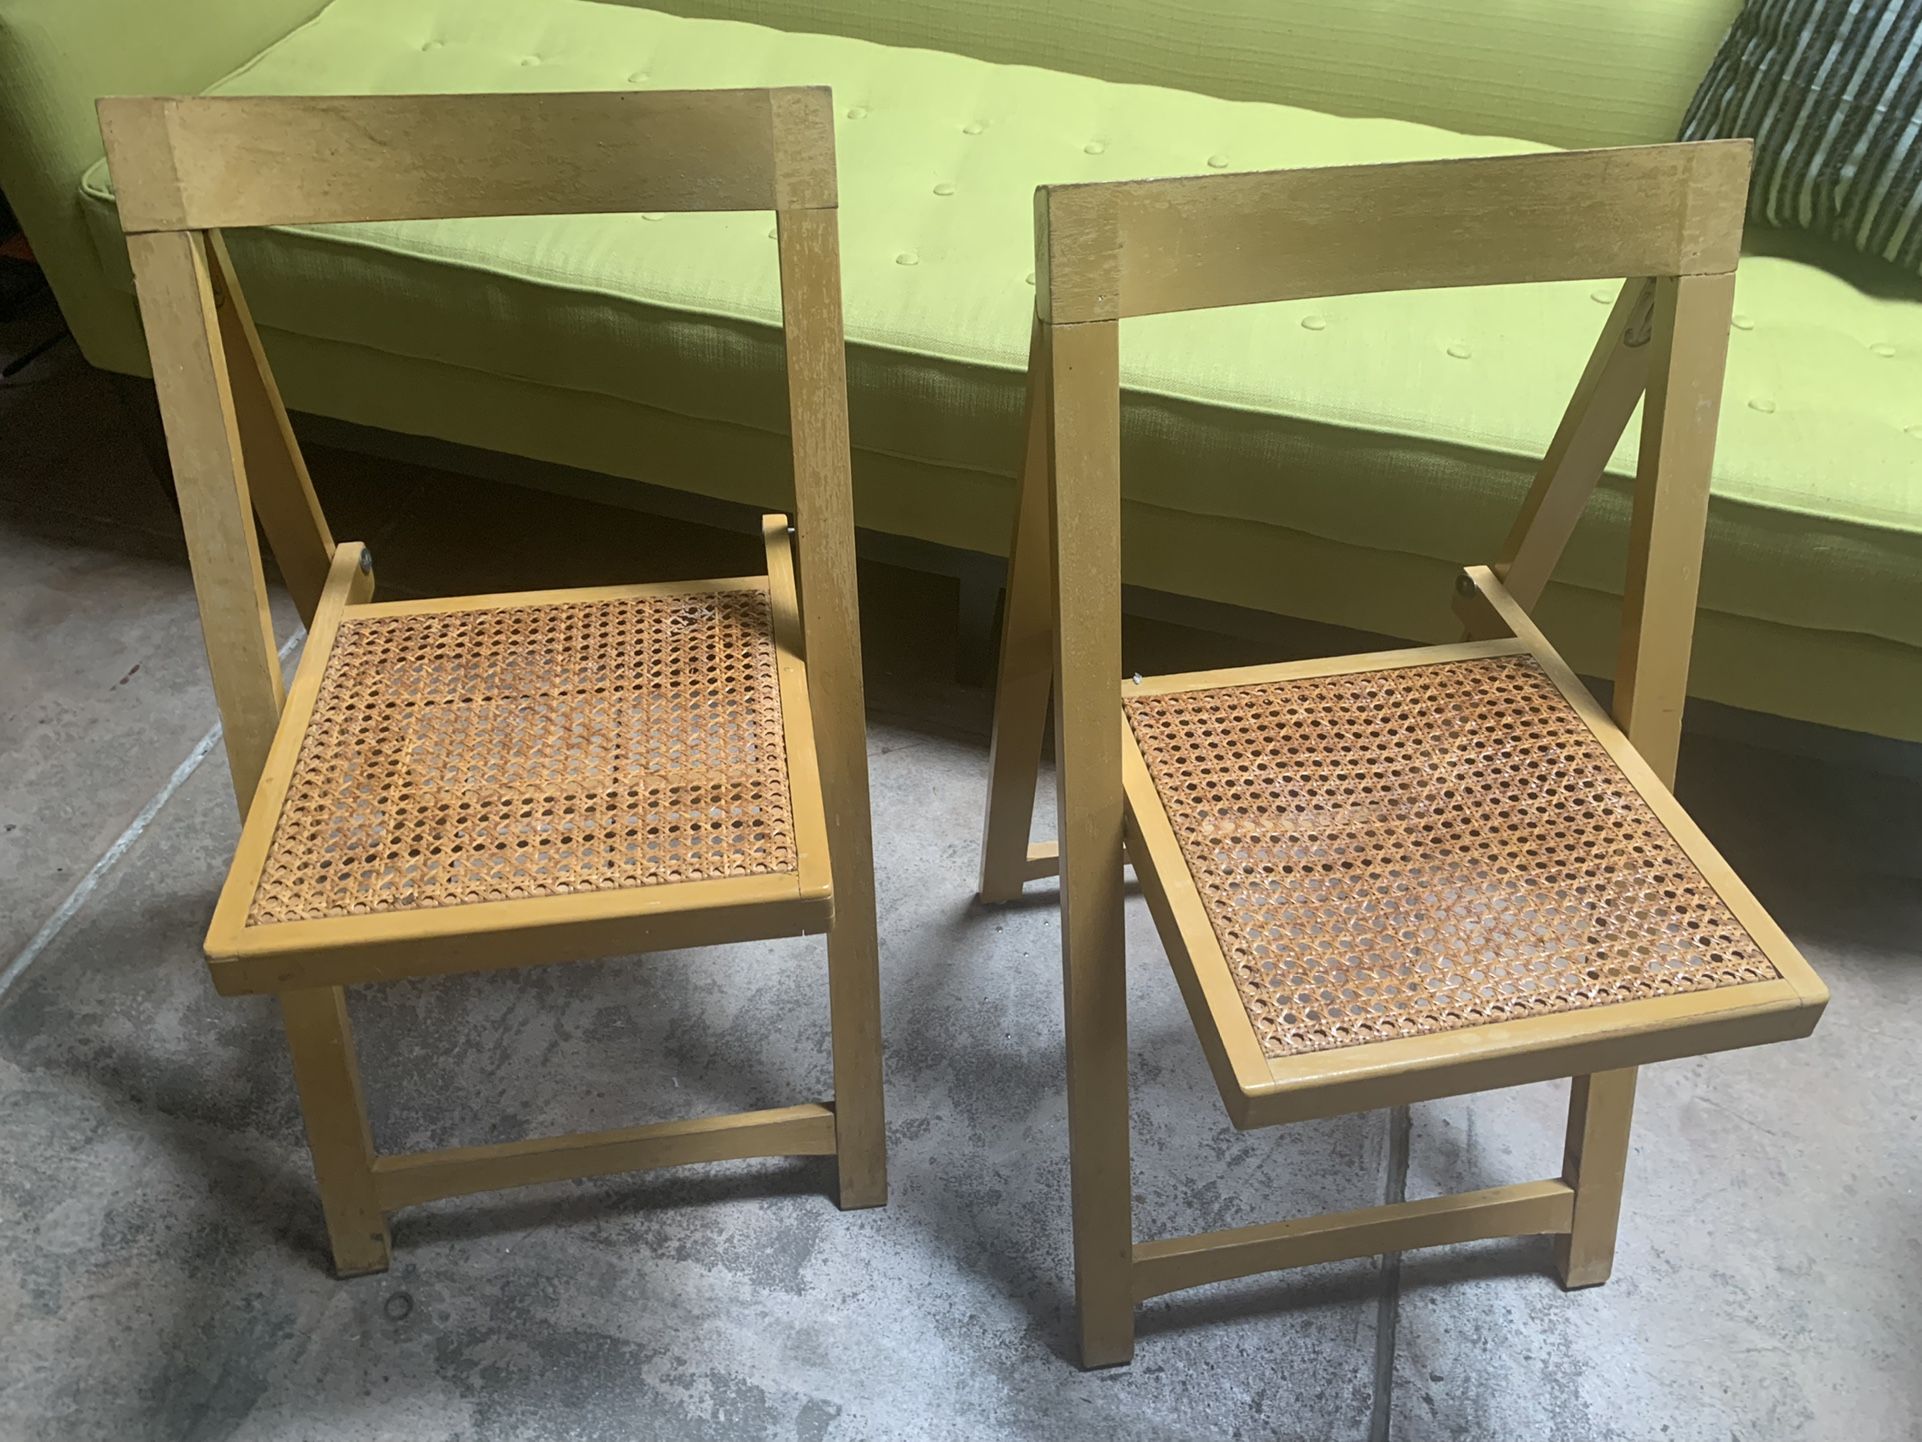 Mid 20th Century Wood and Cane Folding Chairs After Aldo Jacober for Alberto Bazzani - Set of 2